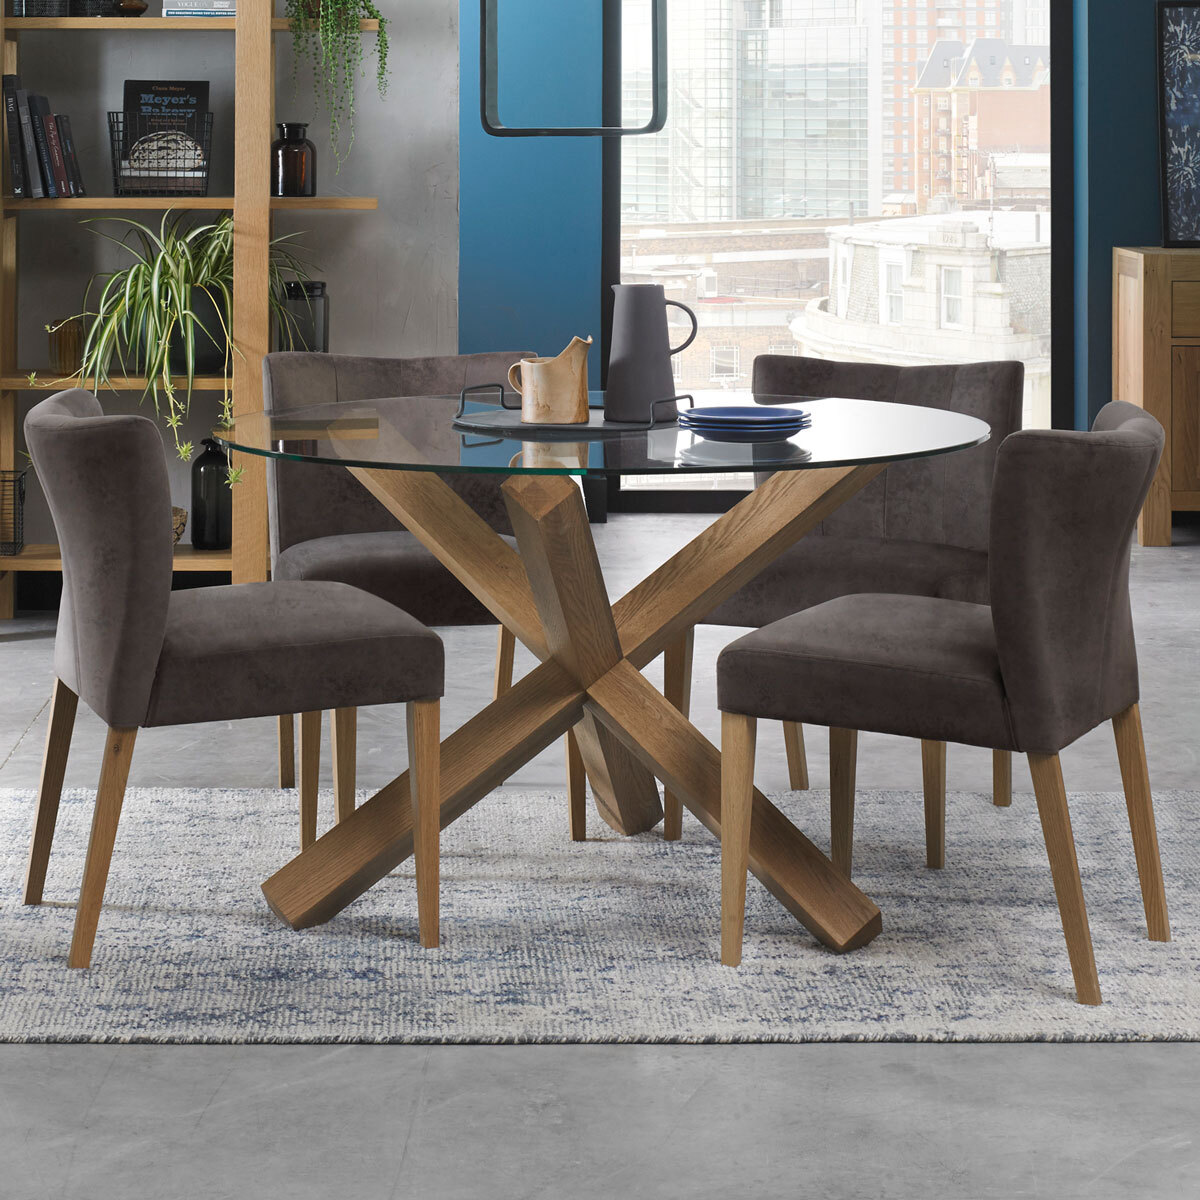 Bentley Designs Turin Glass Top Round, Round Dining Table And 4 Chairs Uk